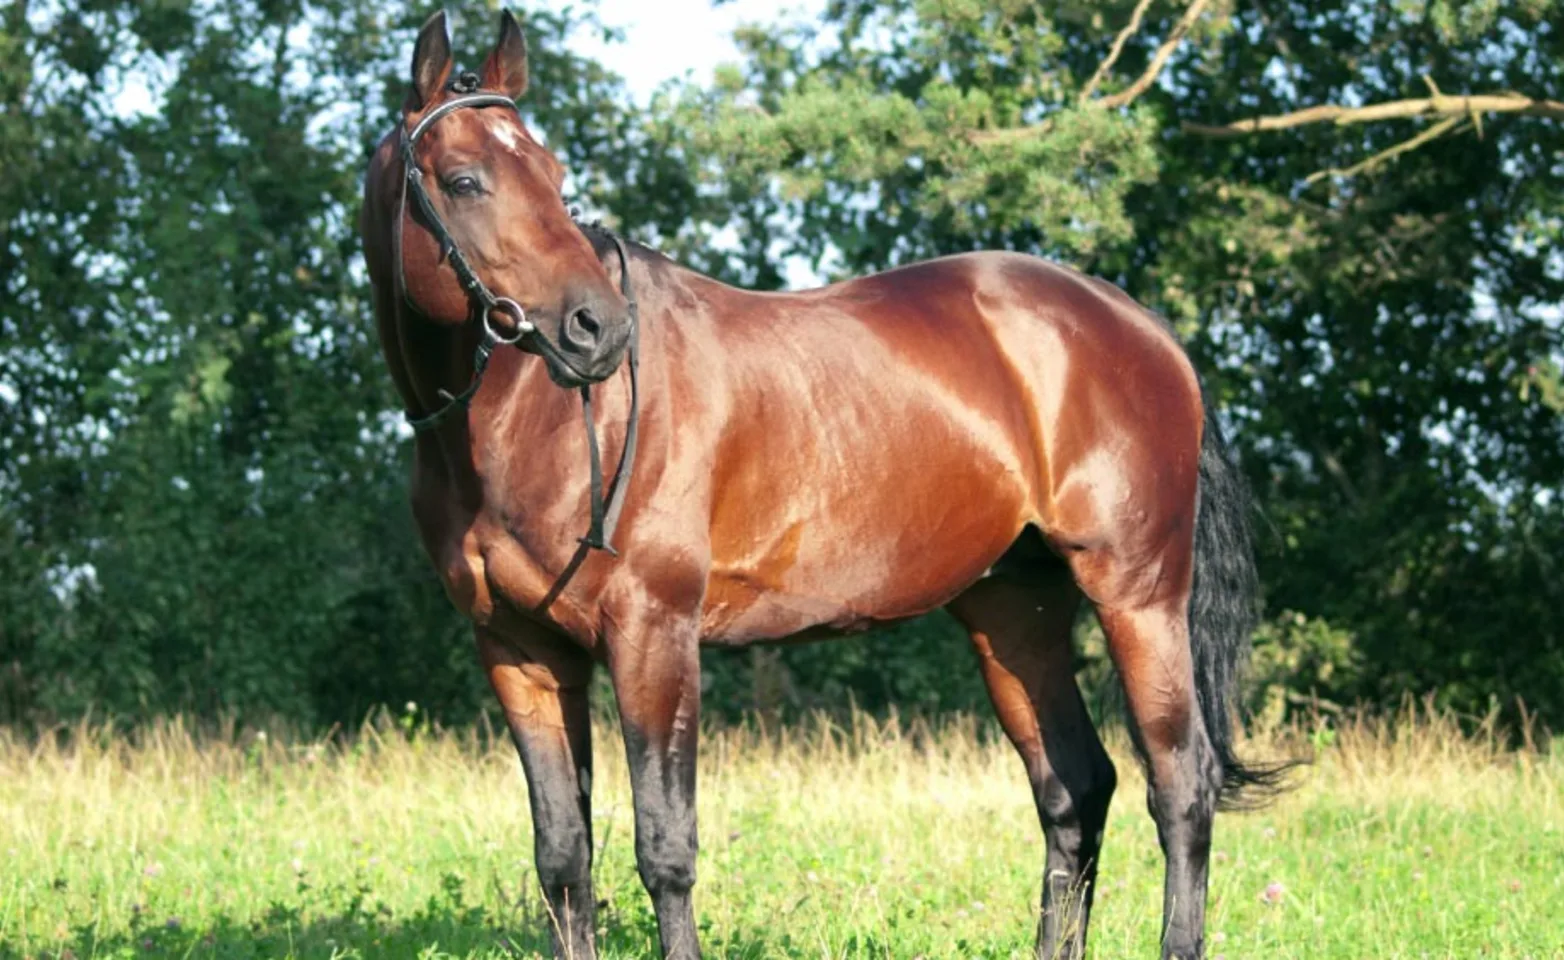 Brown horse with black mane standing in a rural green setting.